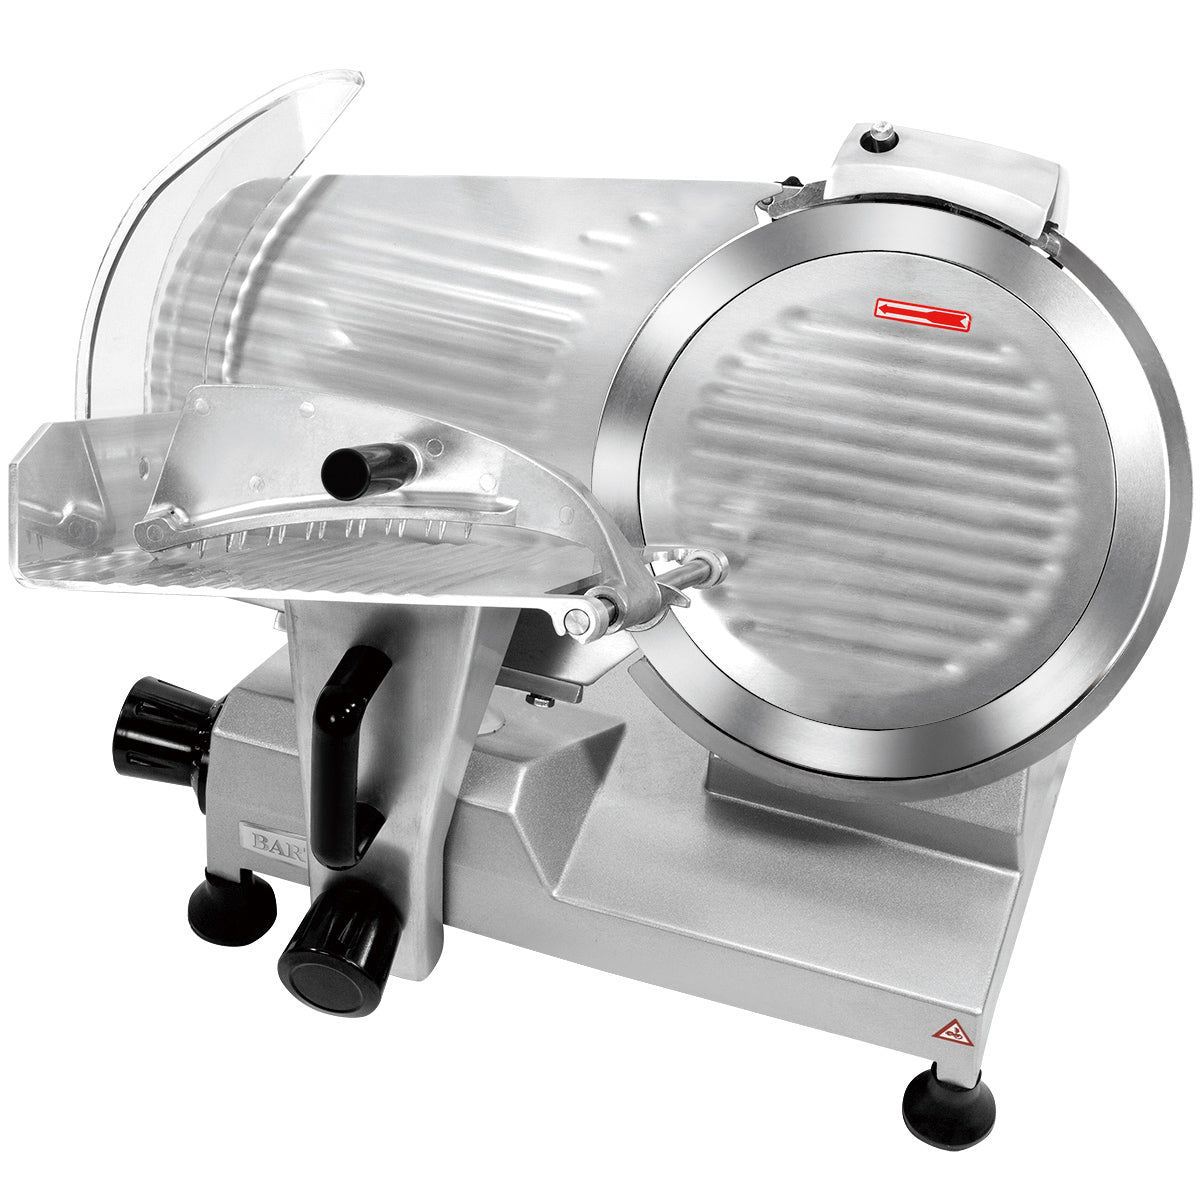 Semi-Automatic Commercial Vegetable Cutter